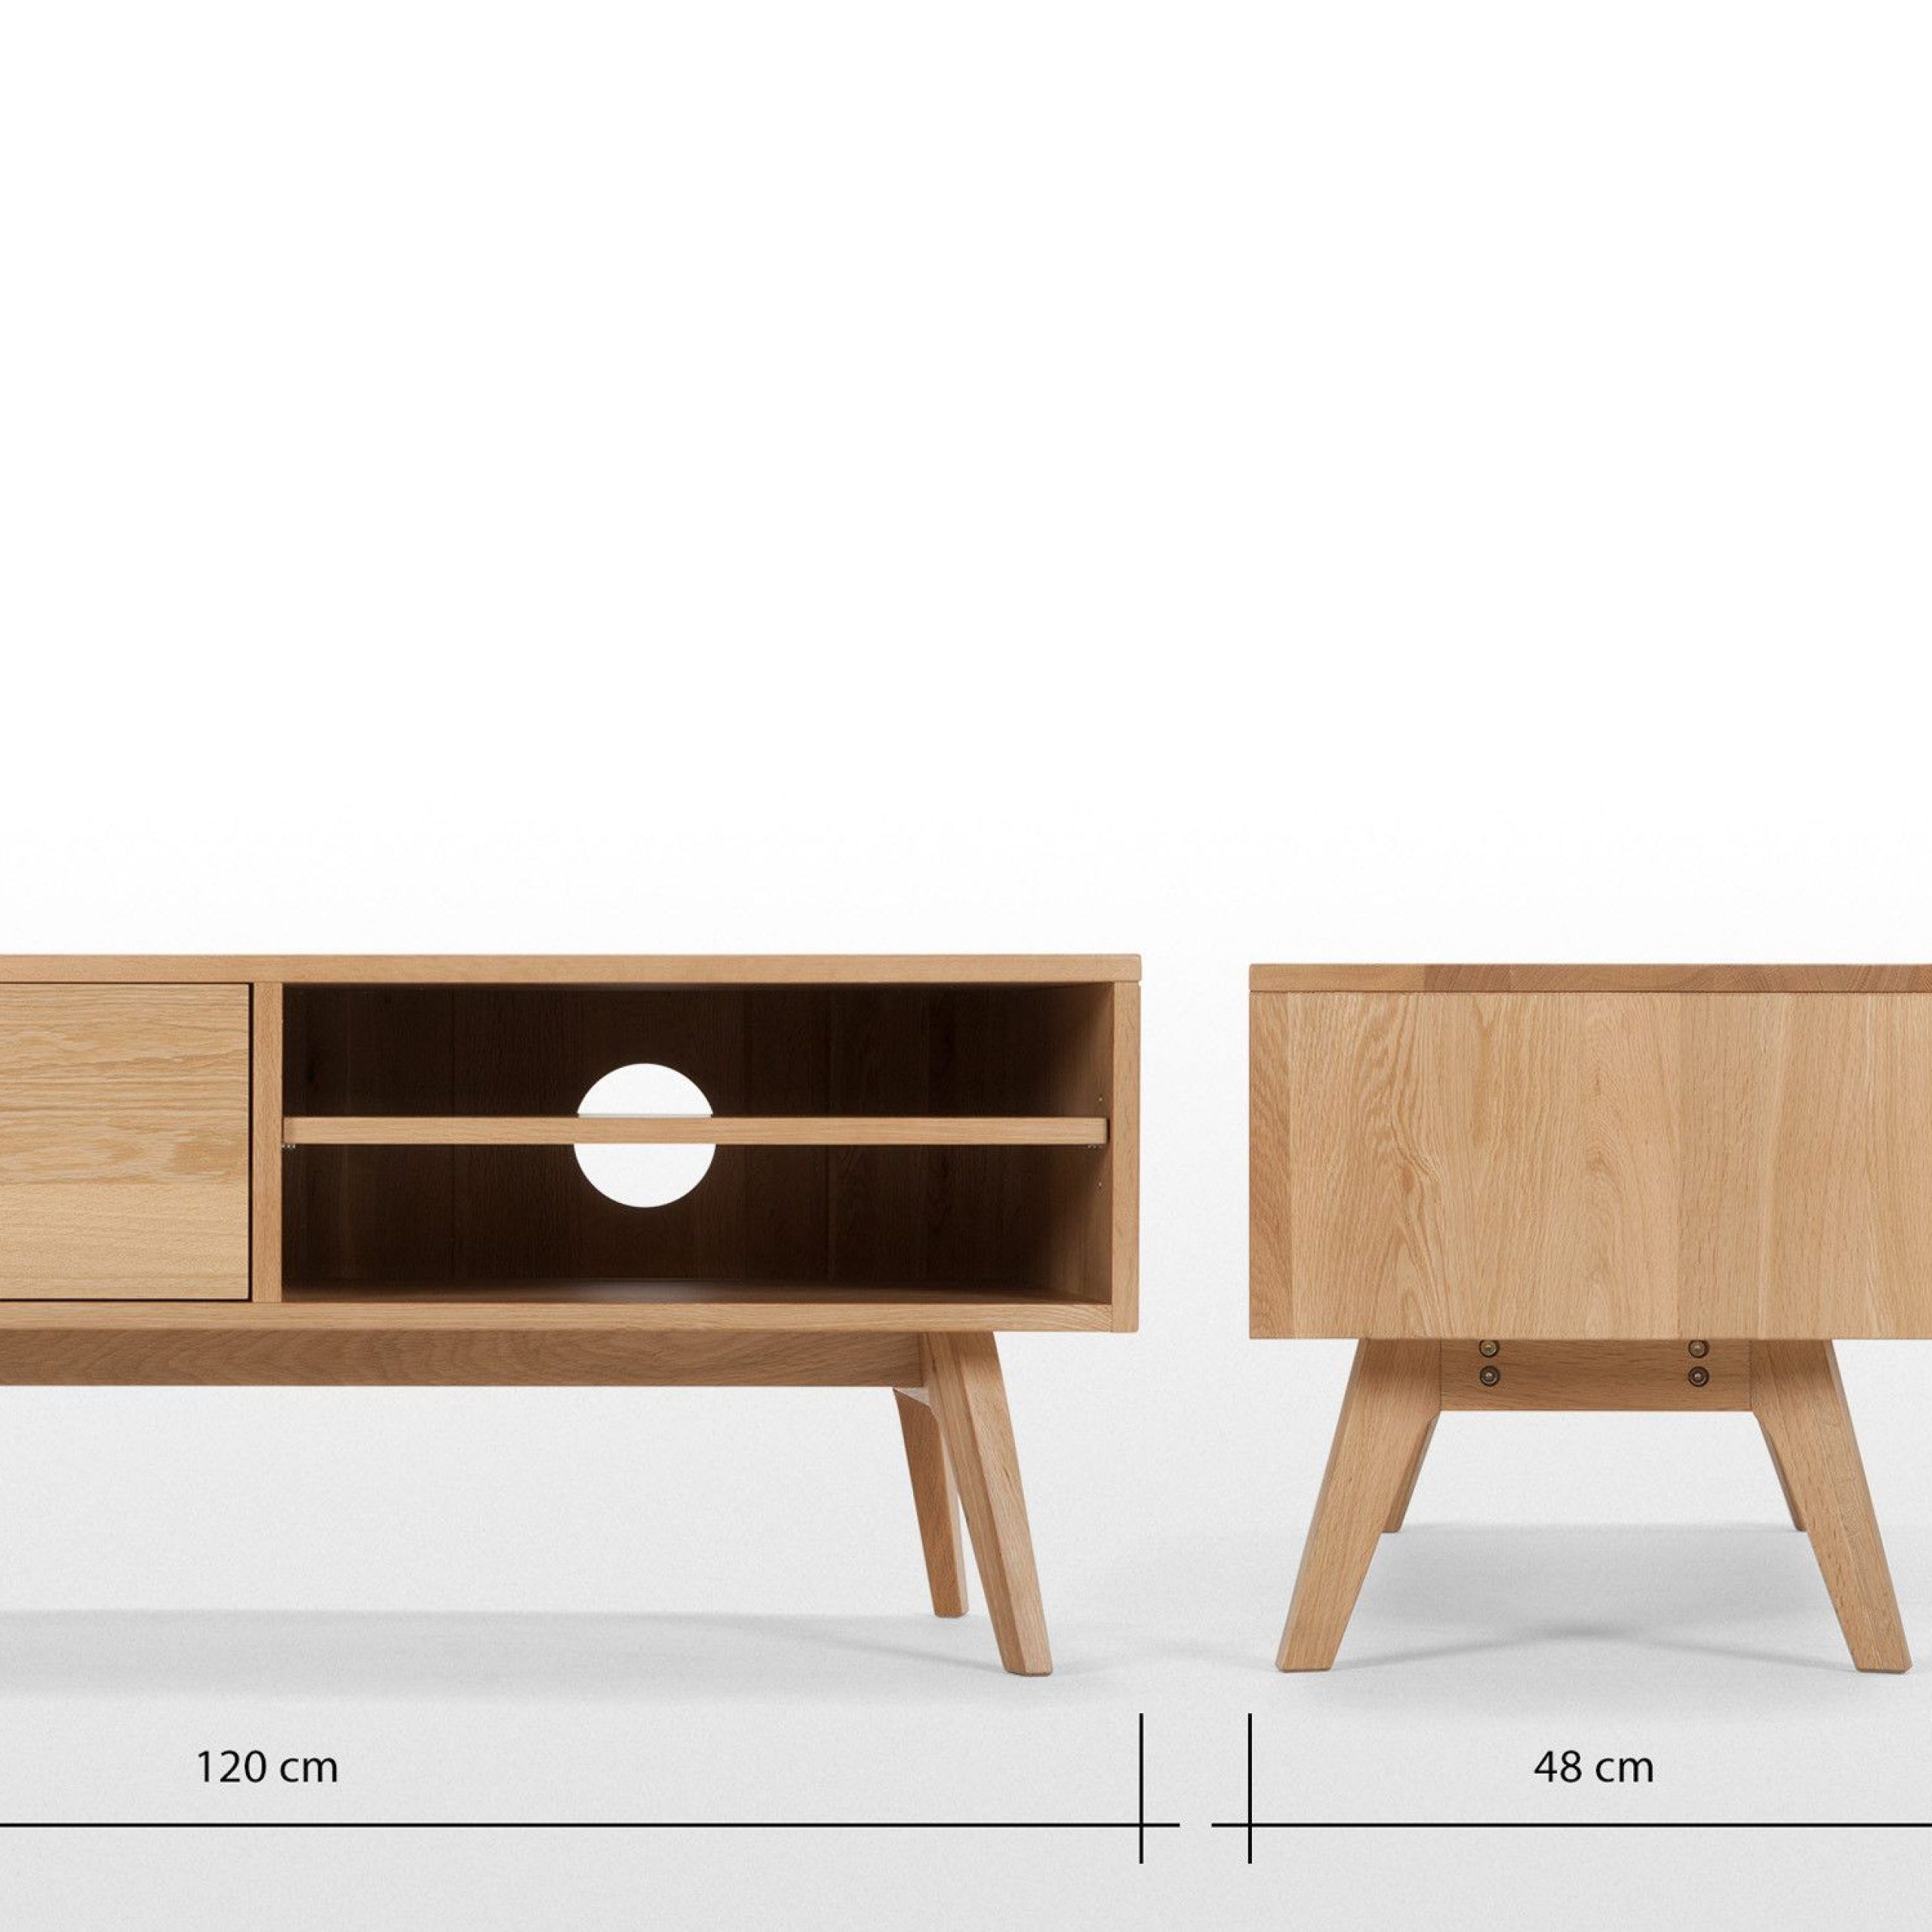 Jenson Media Unit, Solid Oak | Made | Solid Oak, Tv Intended For Lucy Cane Cream Corner Tv Stands (View 13 of 15)